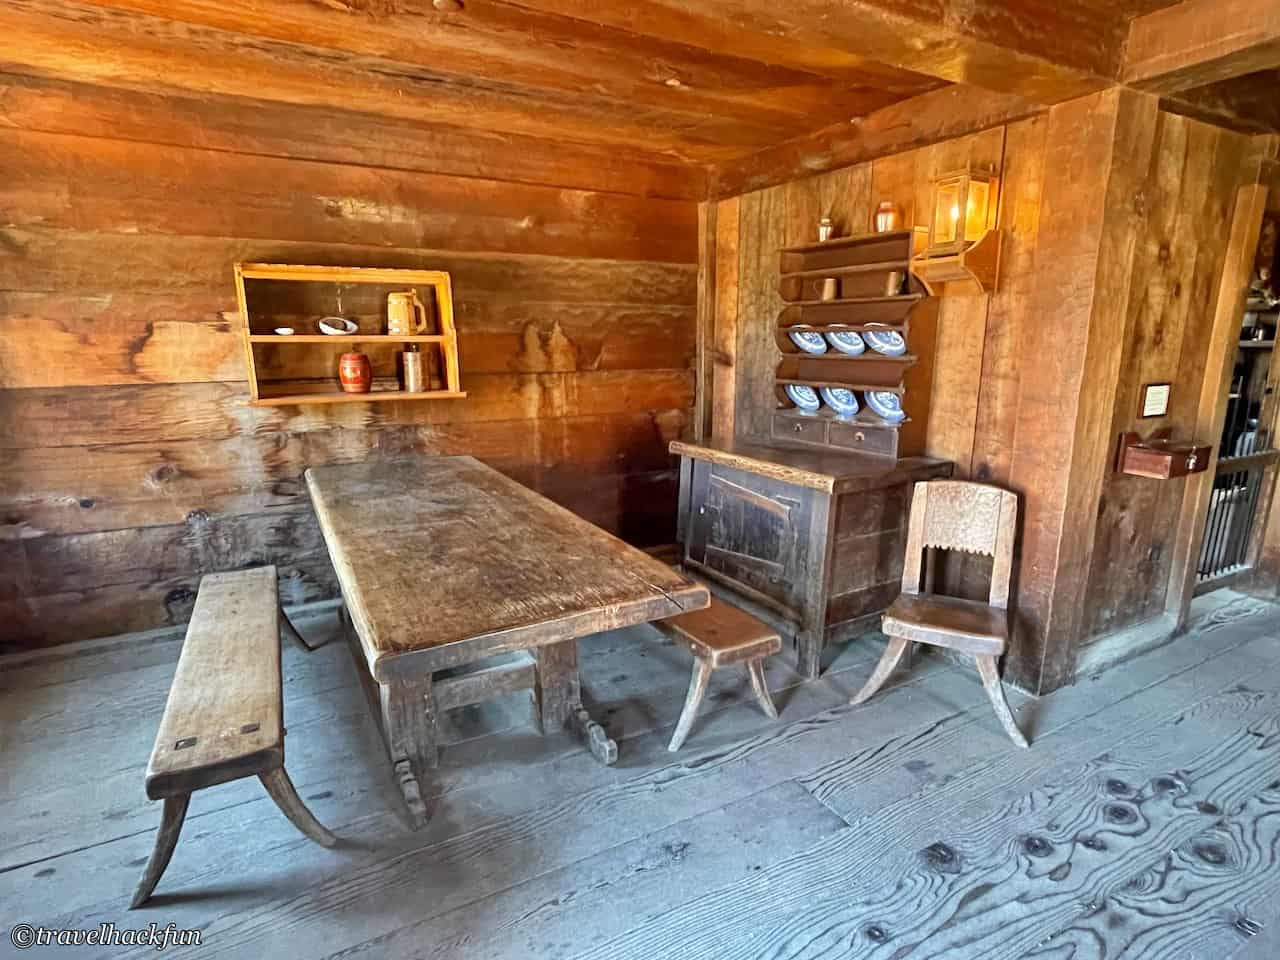 Fort Ross,俄羅斯堡,fort ross state park,fort ross state historic park,fort ross california 22